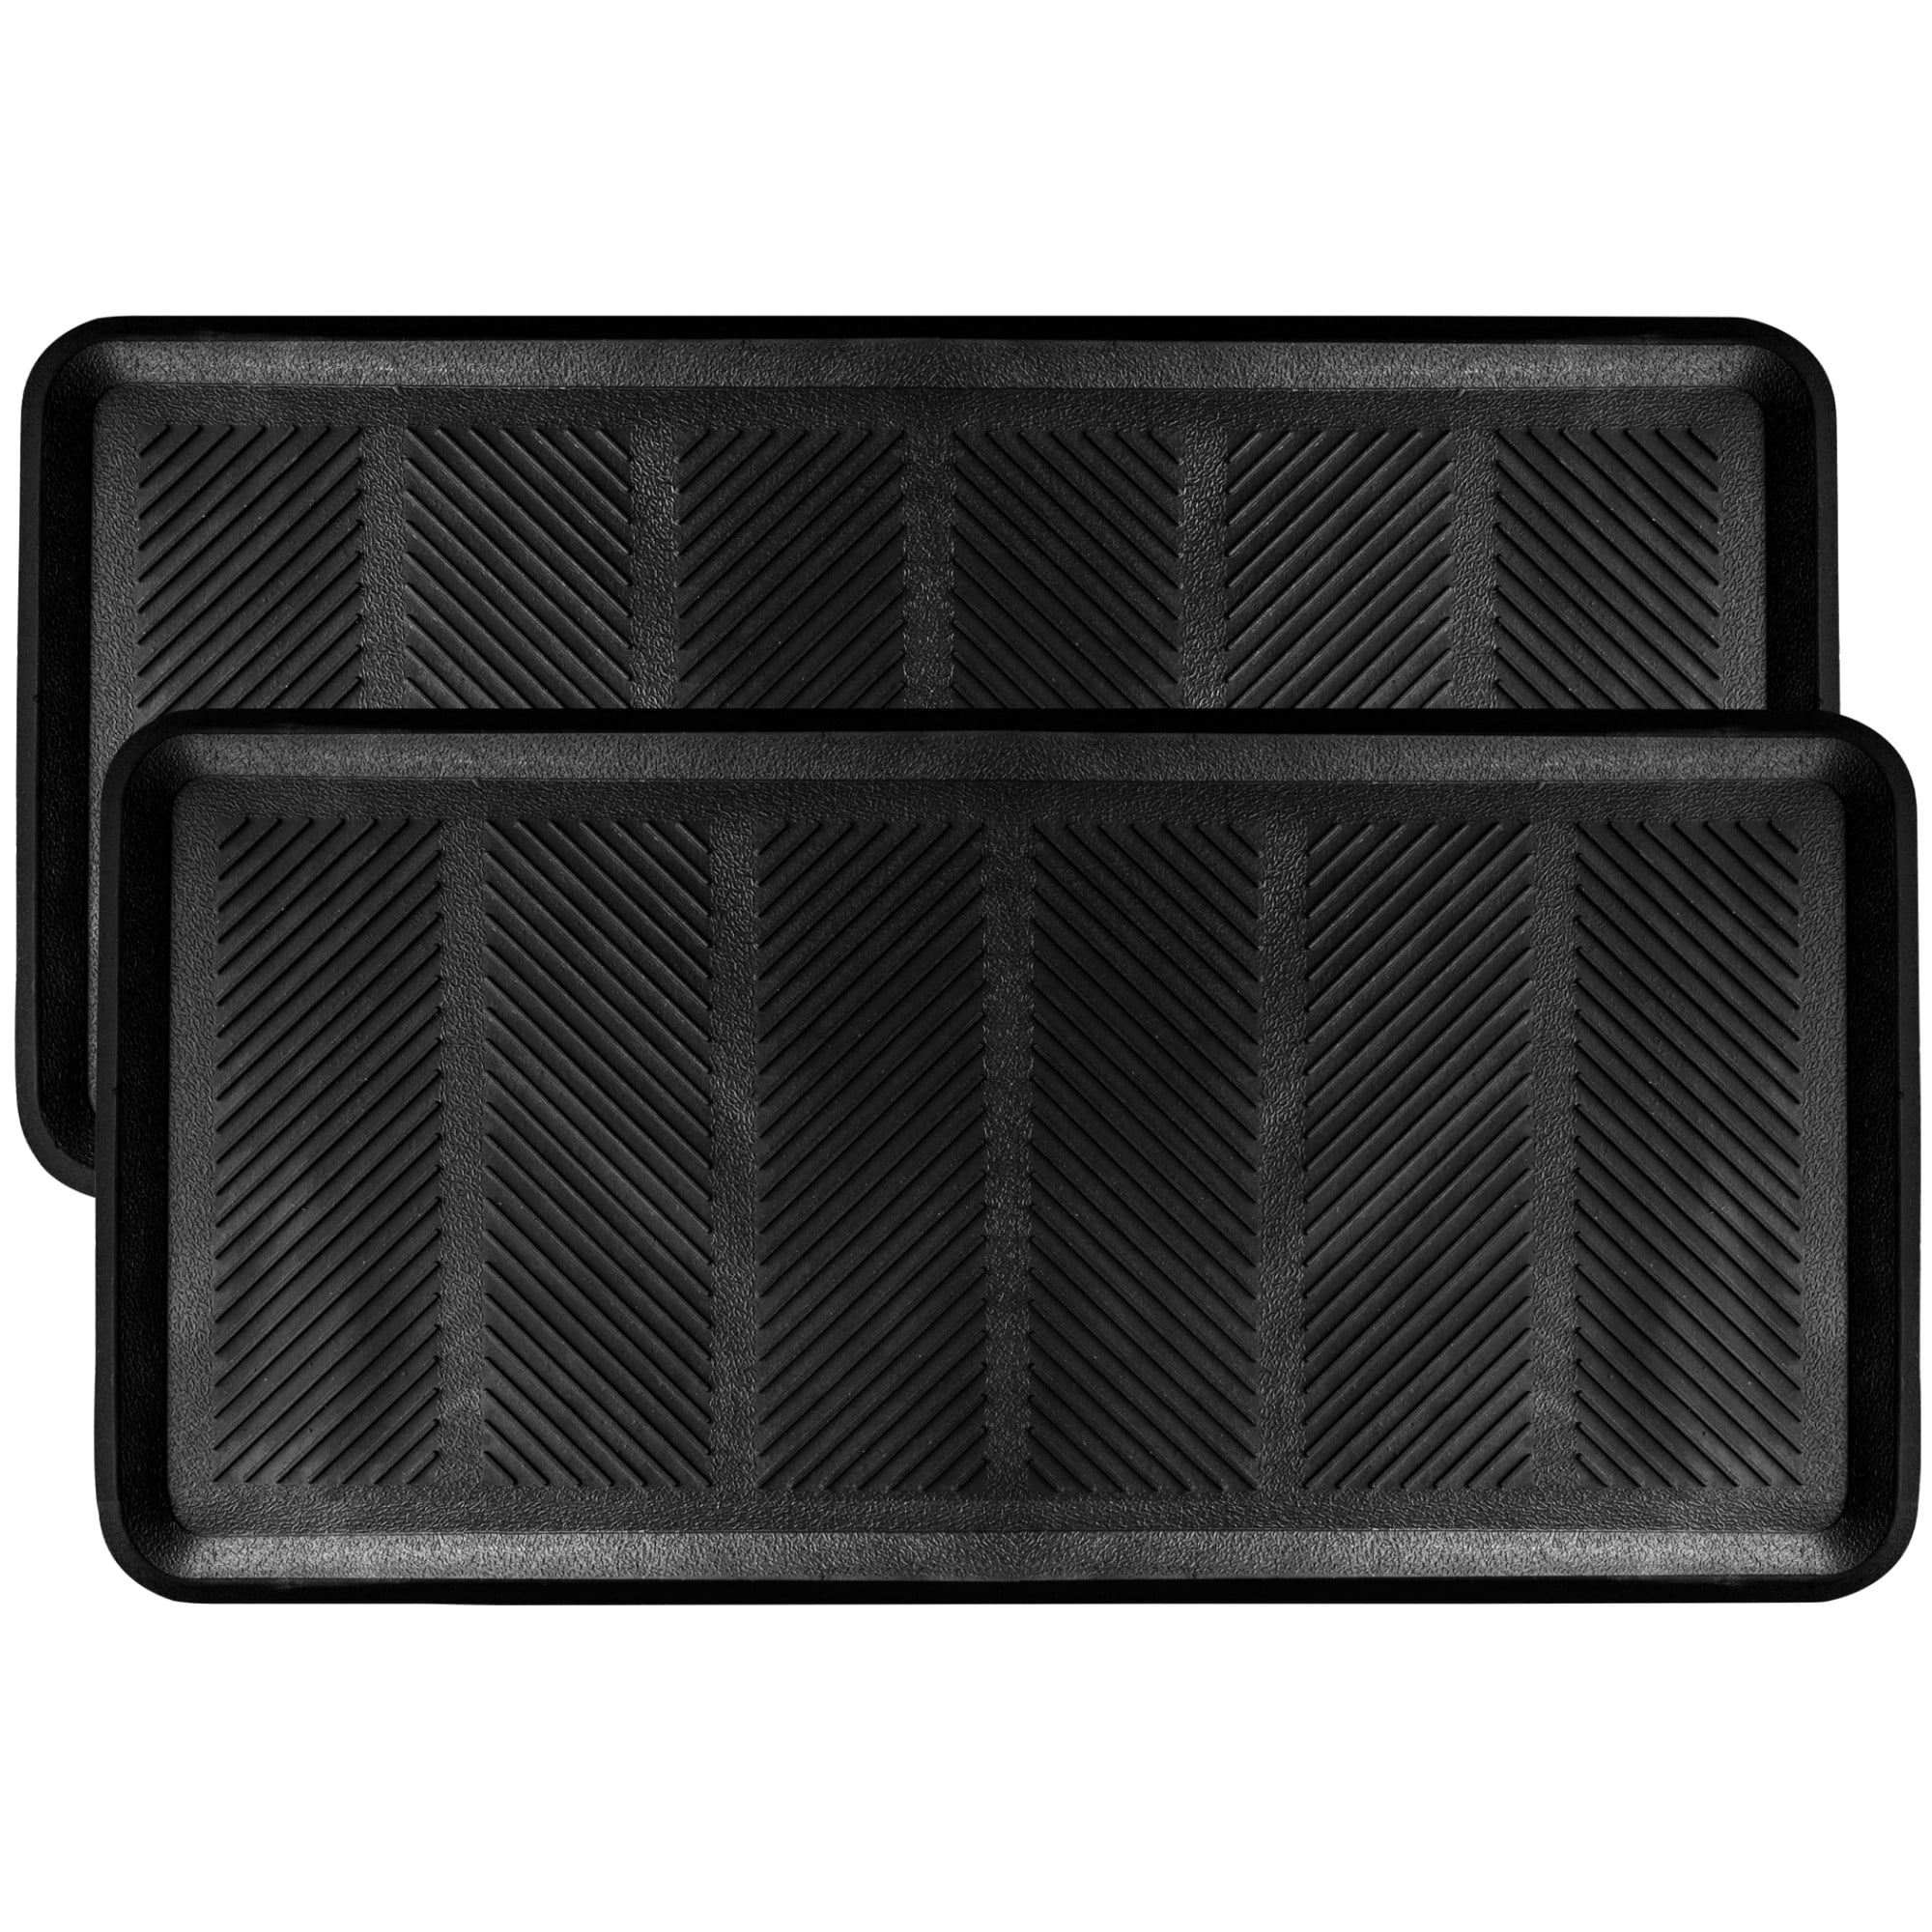 Sportman lokaal rouw SafetyCare Rubber Shoe & Boot Tray - Multi-Purpose - 32 x 16 Inches - 2 Mats  - Walmart.com